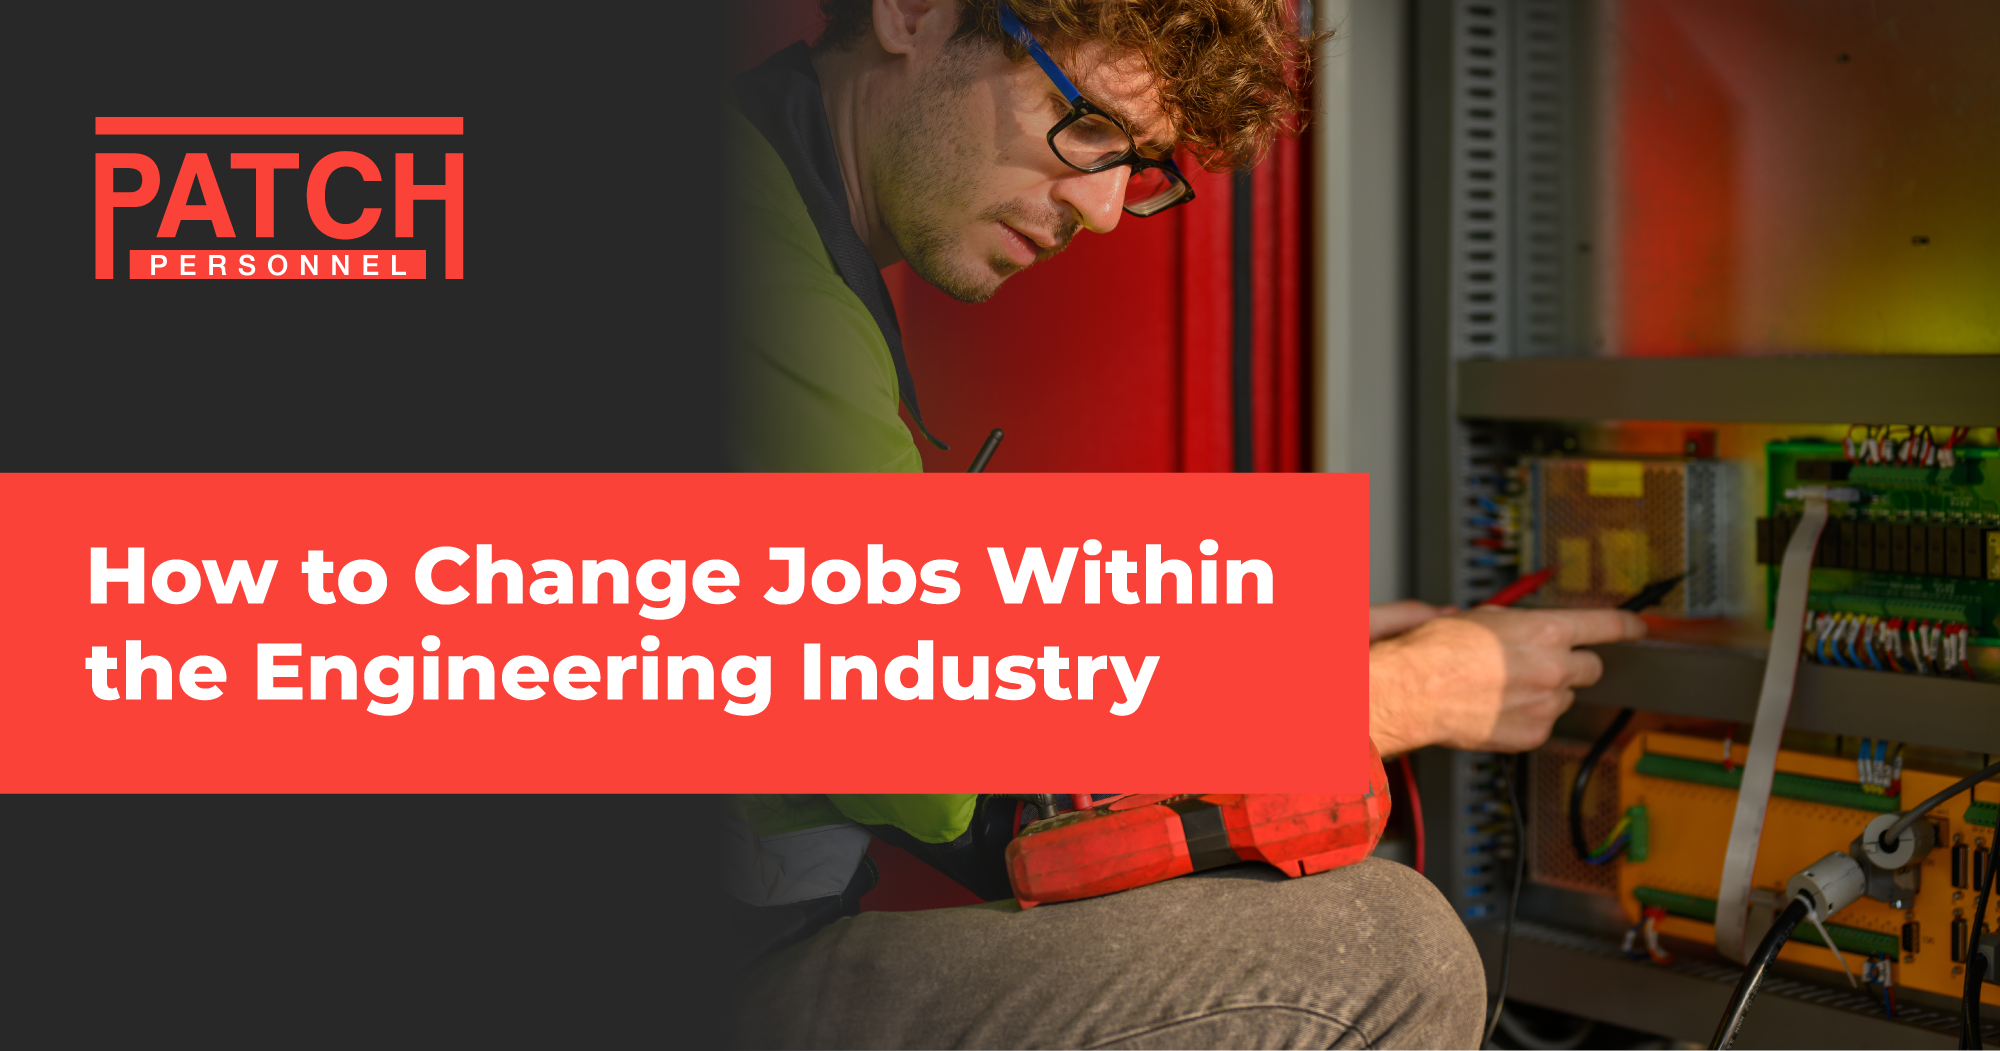 How to Change Jobs Within the Engineering Industry